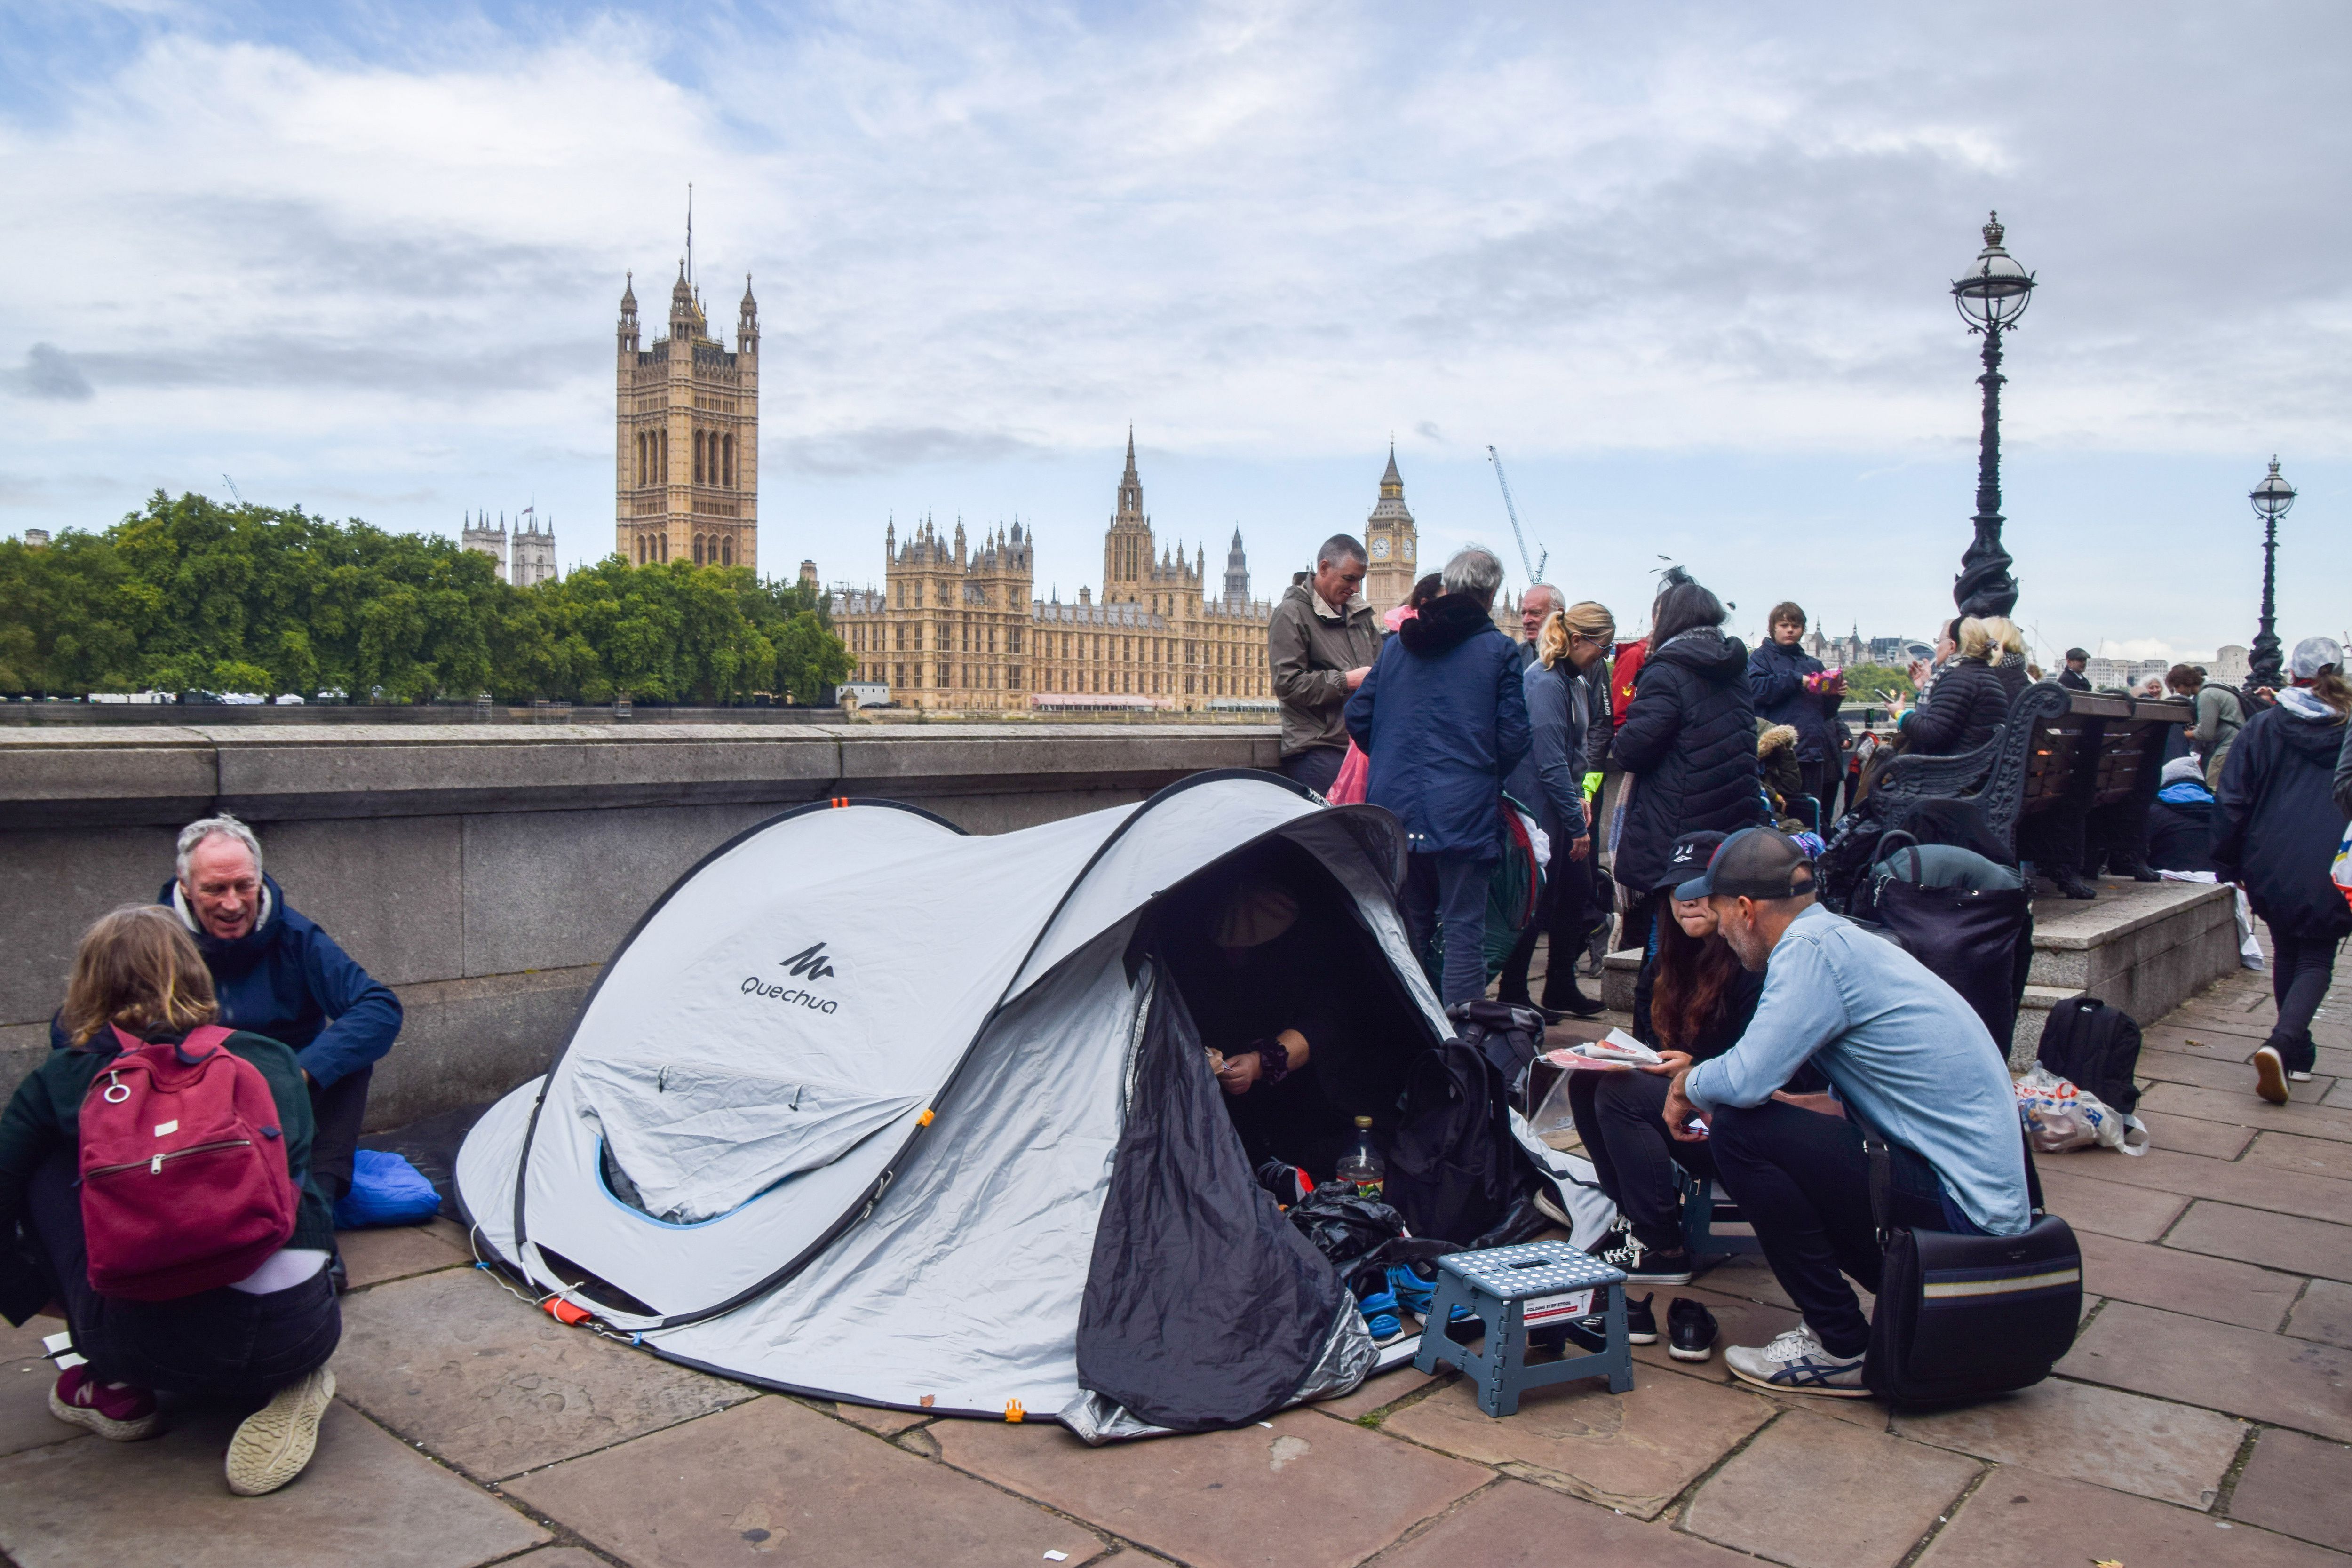  People sit inside their tent as they join the queue to pay their respects to Queen Elizabeth II who passed away on September 8th, 2022.